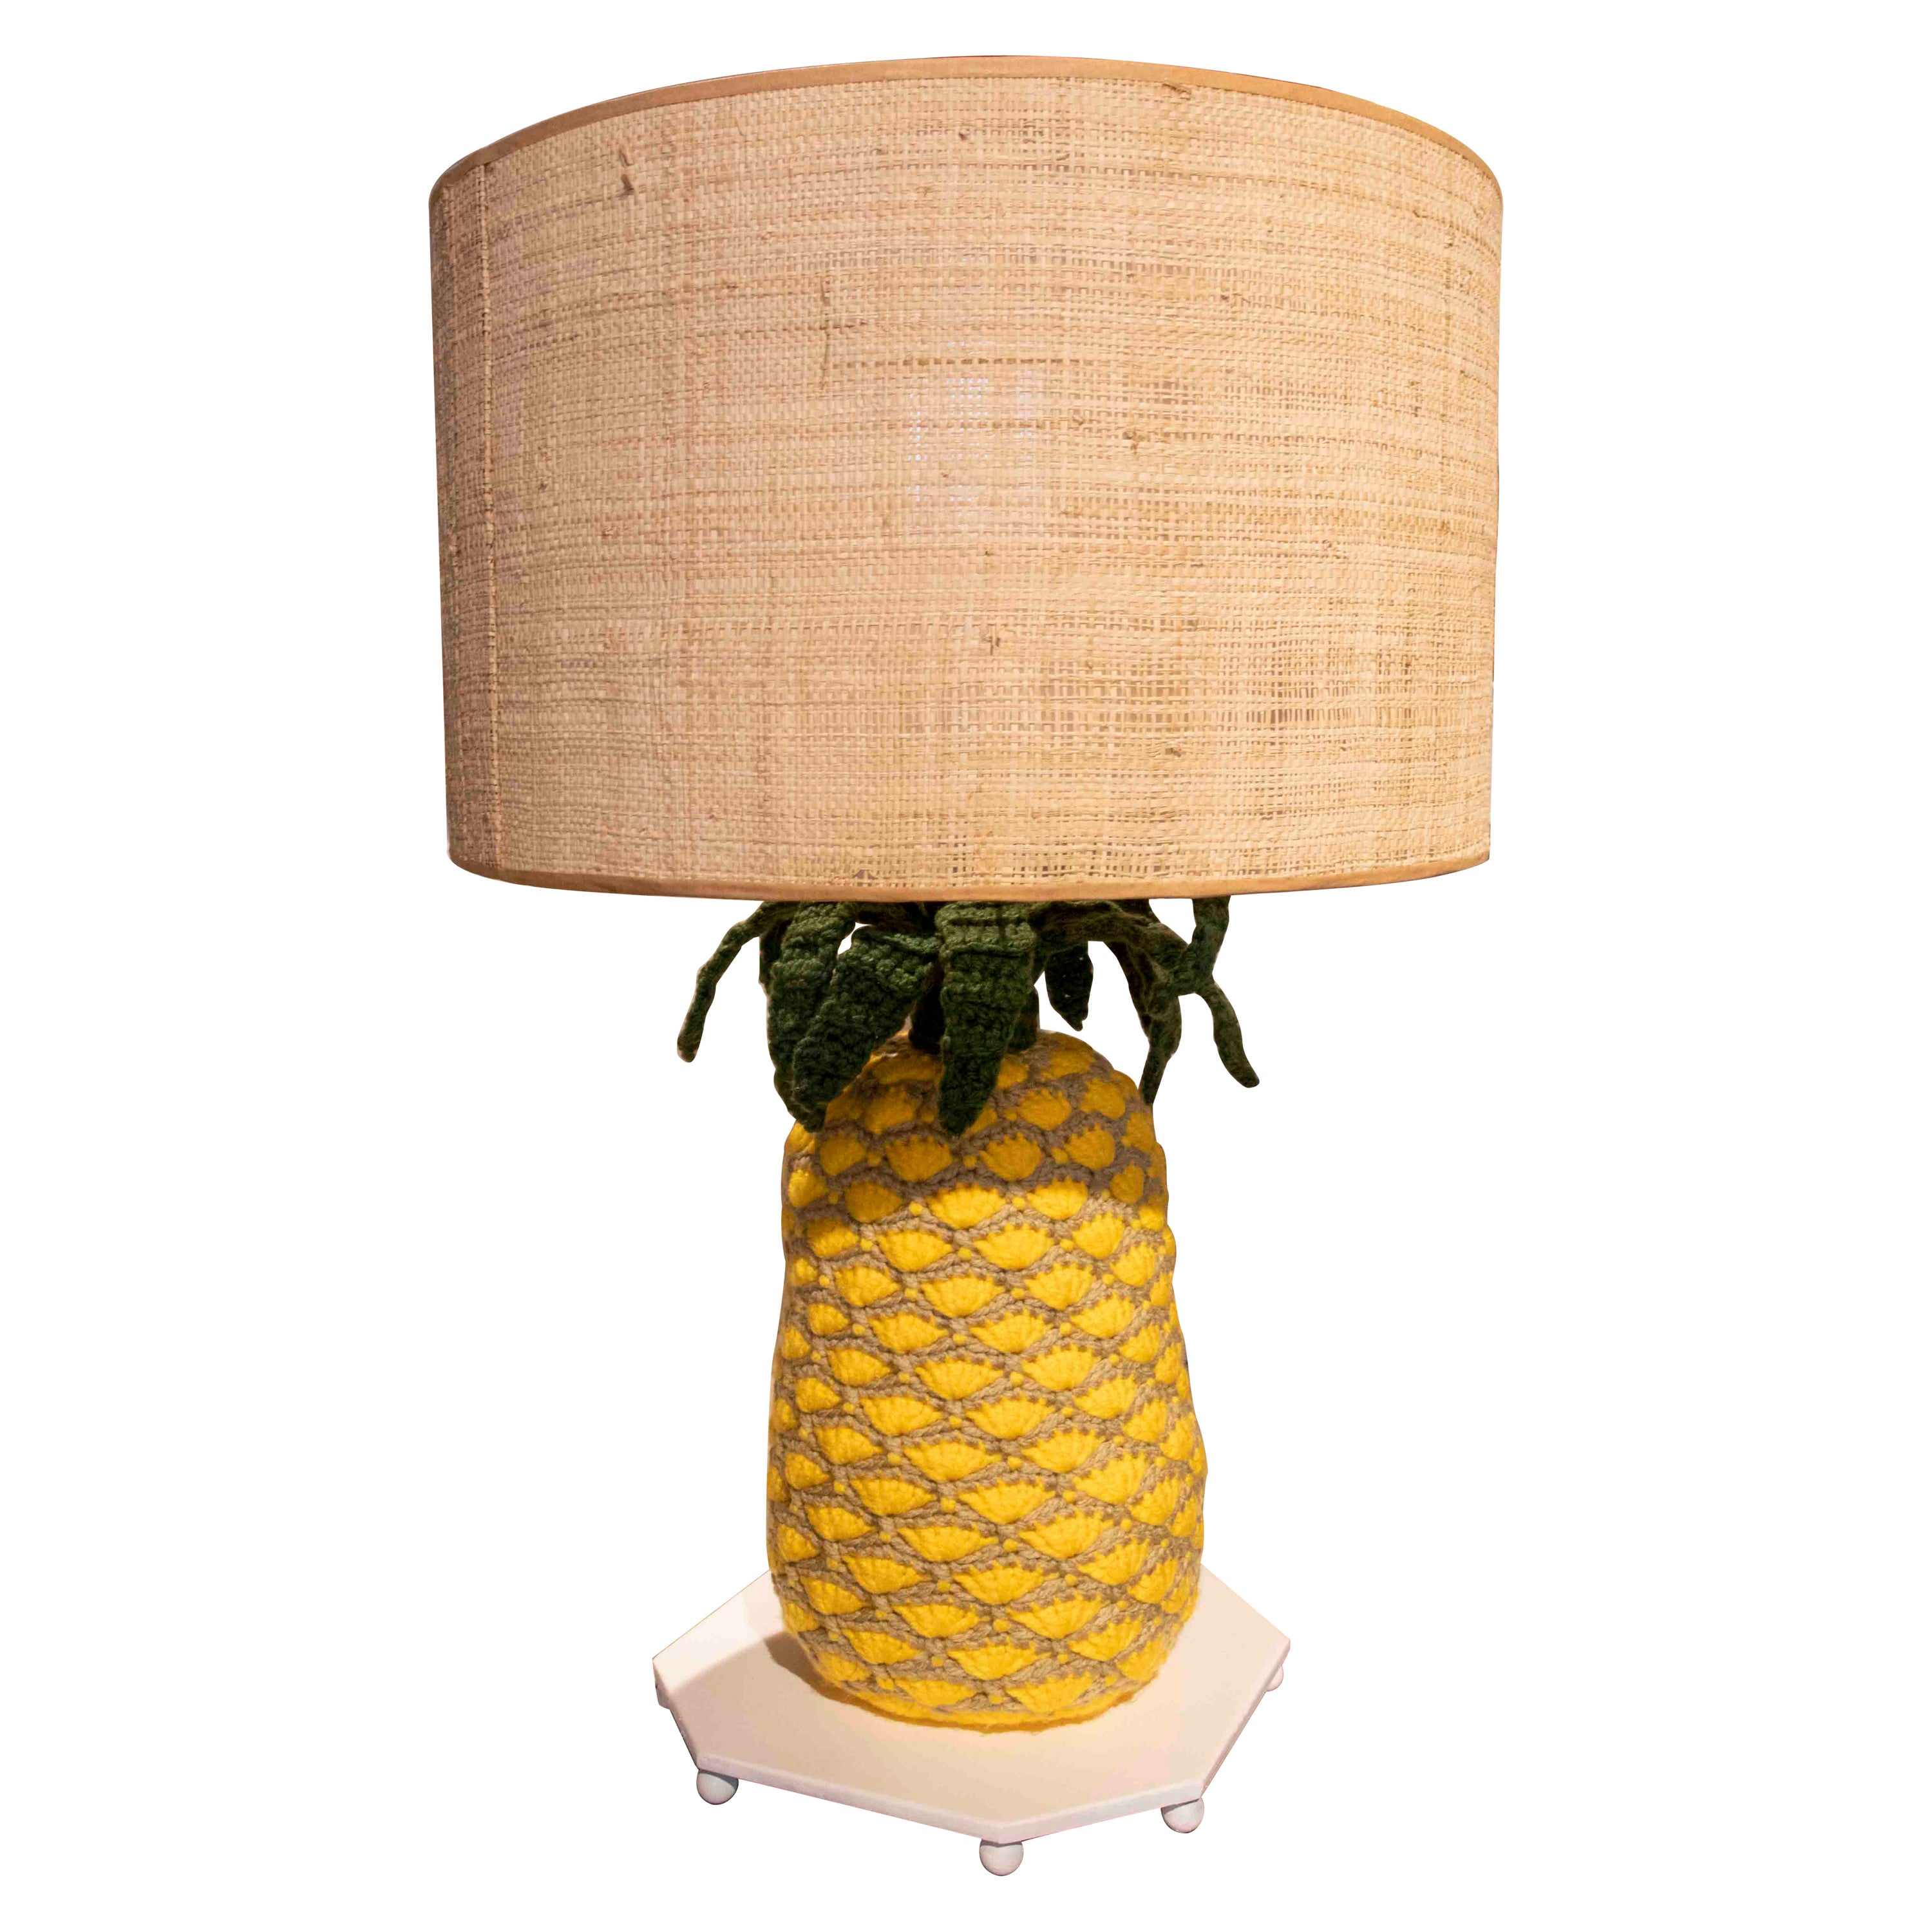 Hand-sewn Pineapple Lamp with Wool and Iron Base